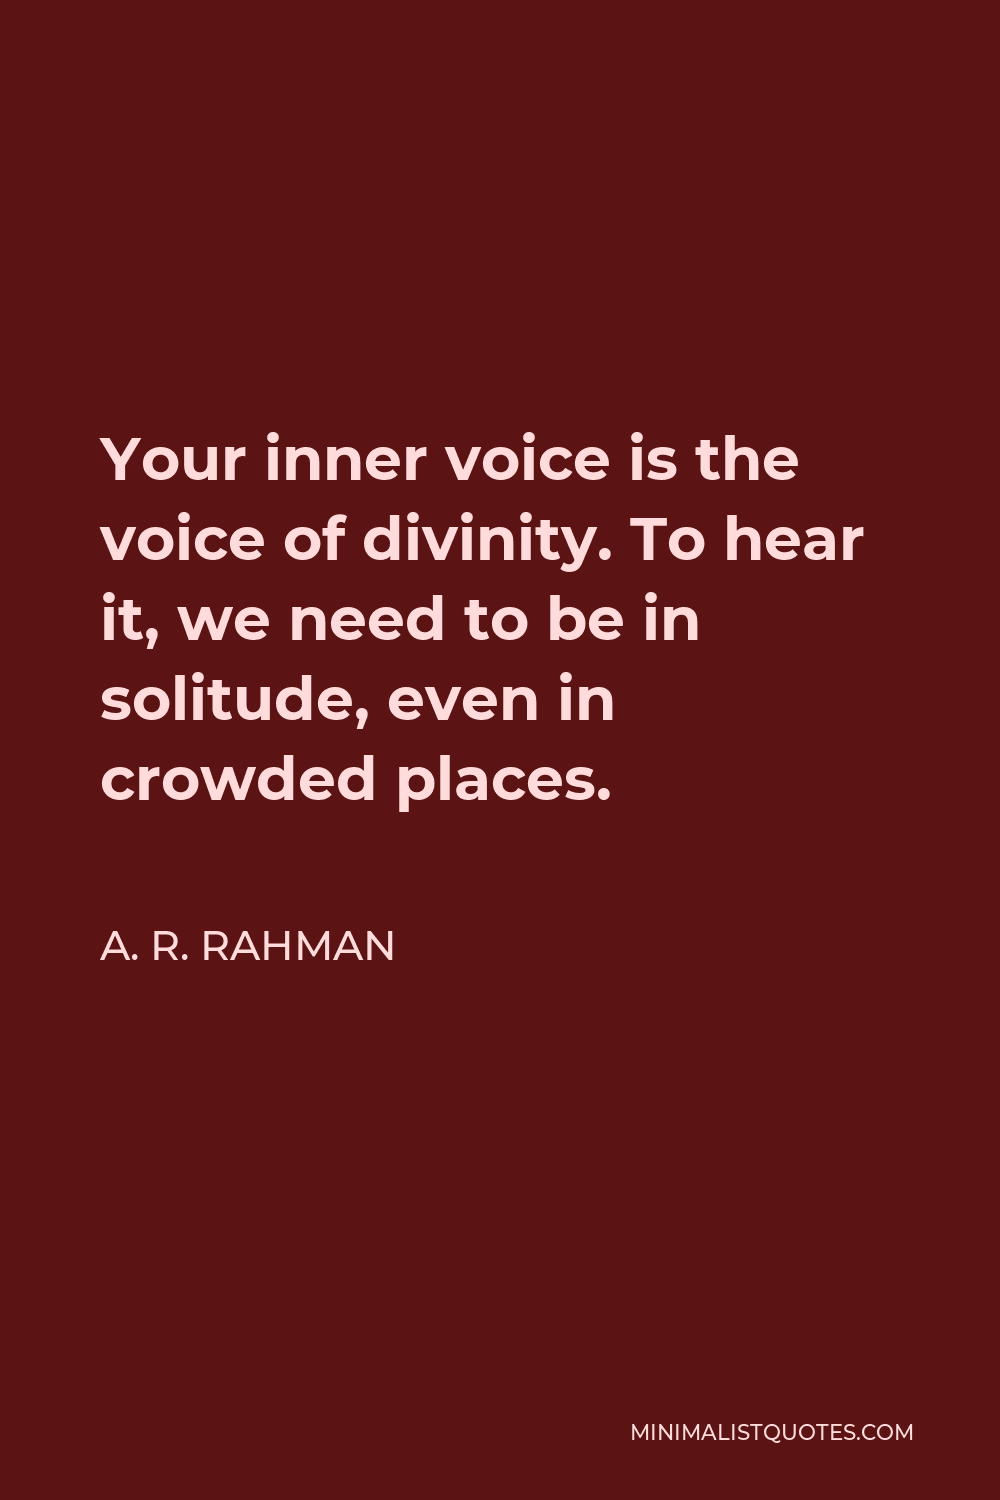 A. R. Rahman Quote - Your inner voice is the voice of divinity. To hear it, we need to be in solitude, even in crowded places.